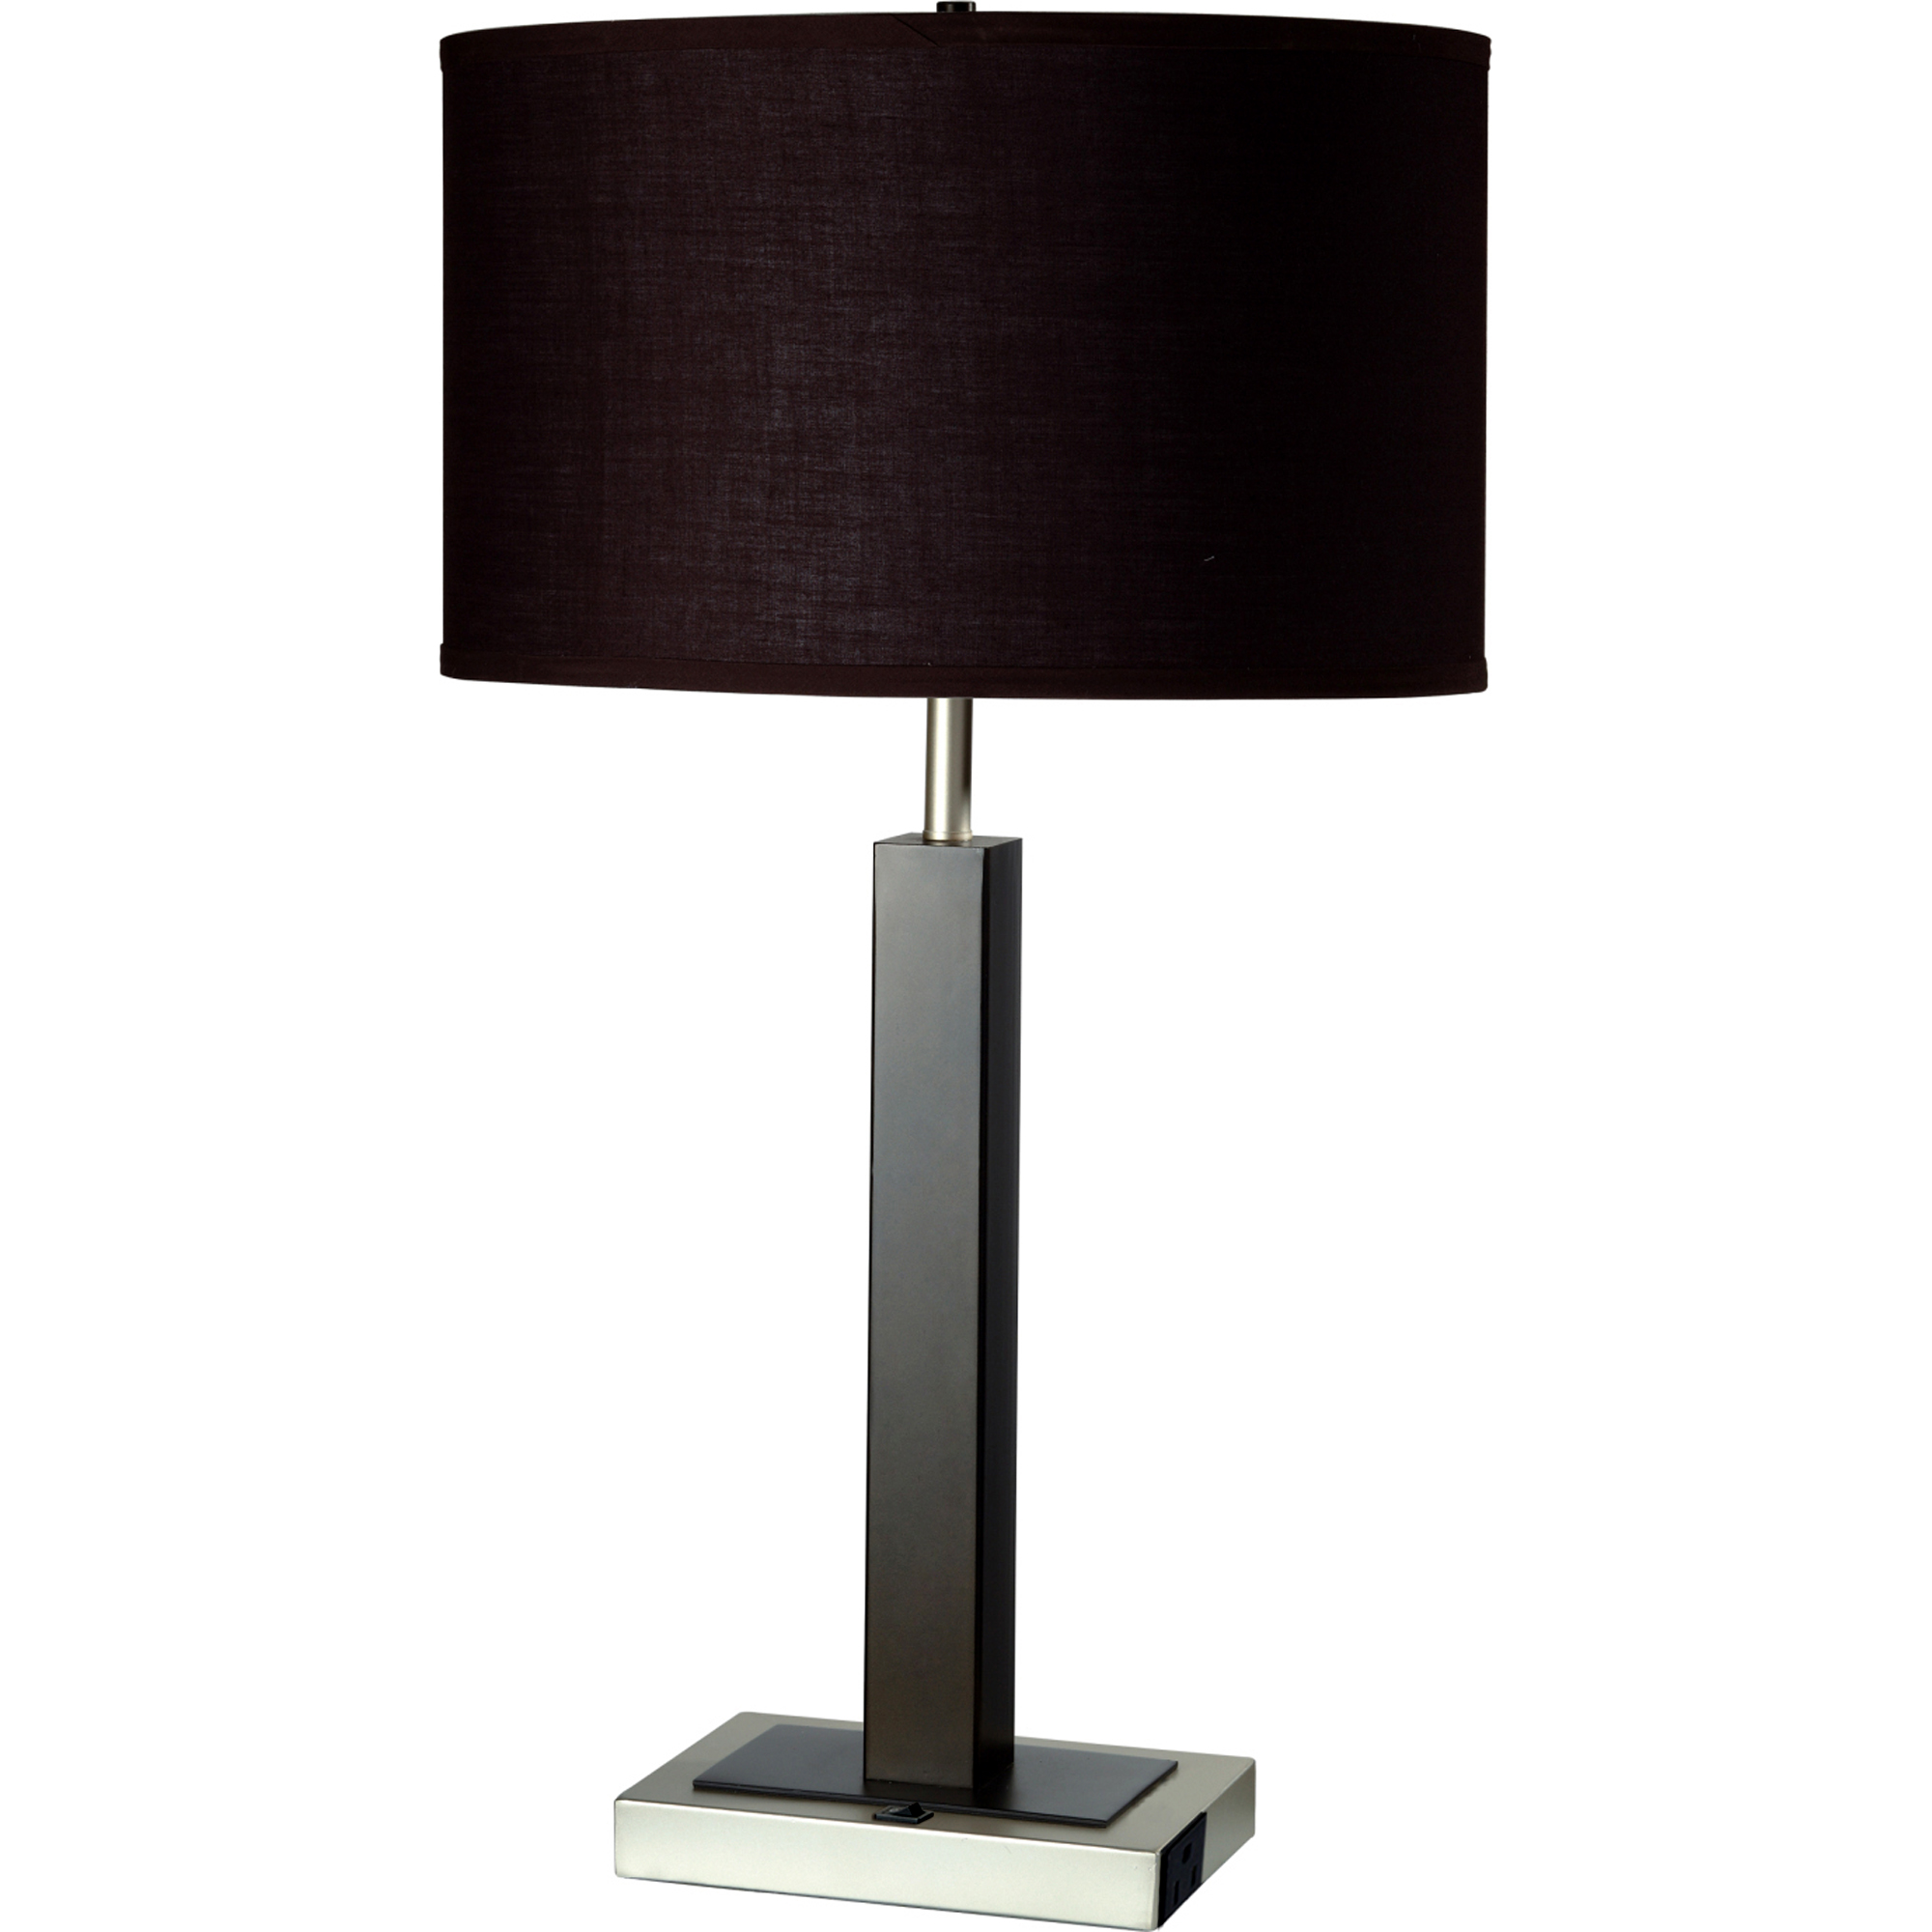 Ore International Metal Table Lamp With Convenient Outlet